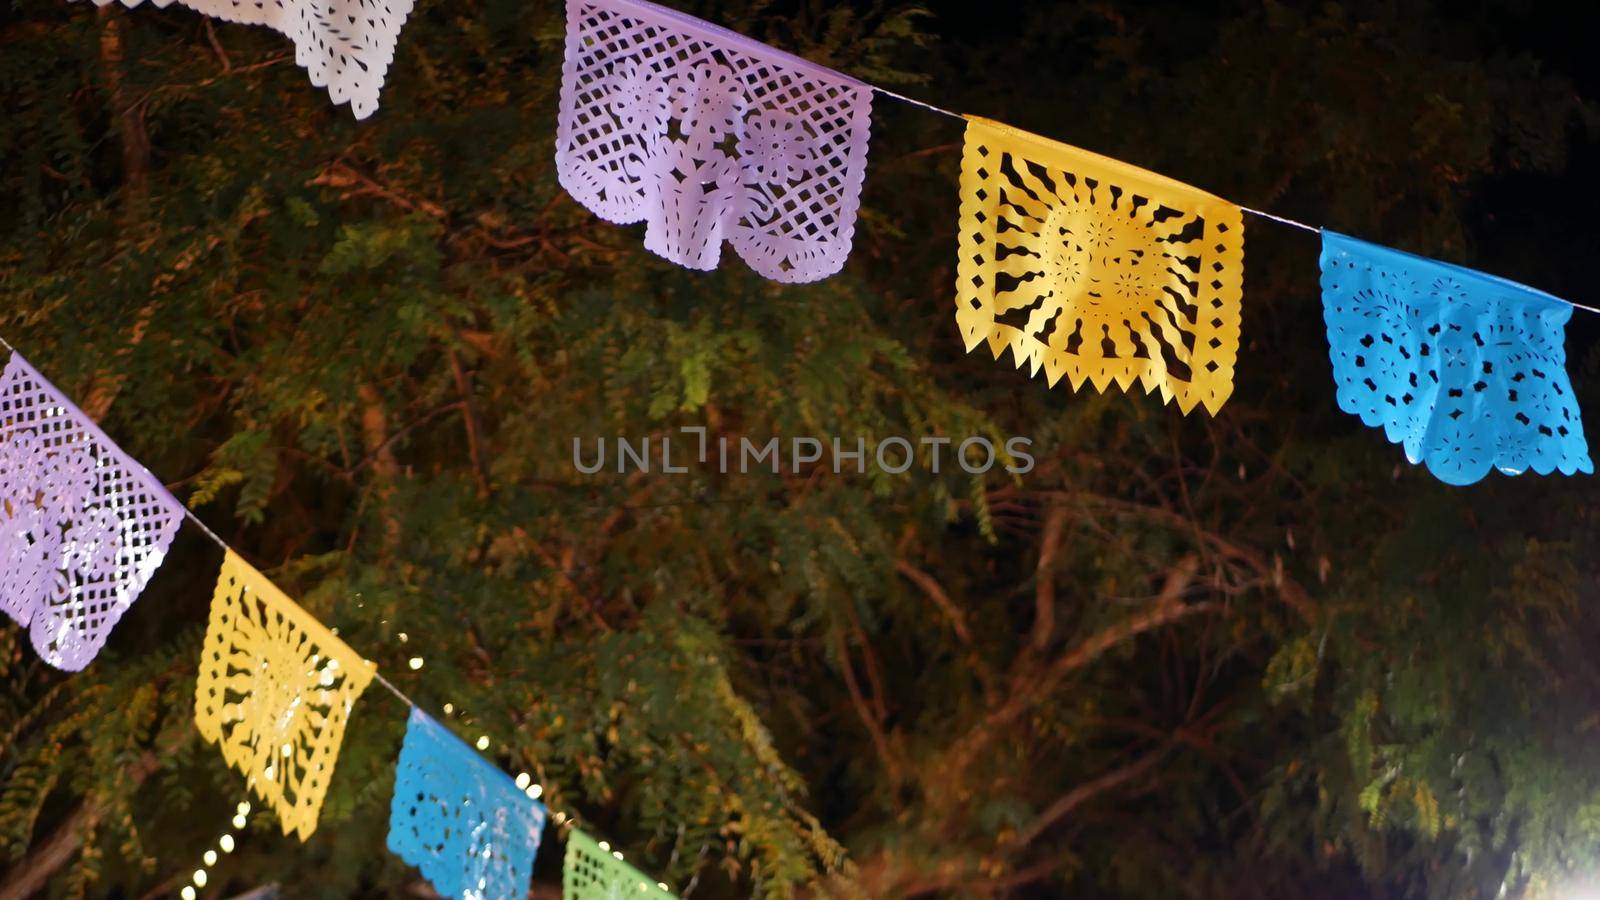 Papel picado garland, paper tissue perforated flags. Mexican party or fiesta. by DogoraSun